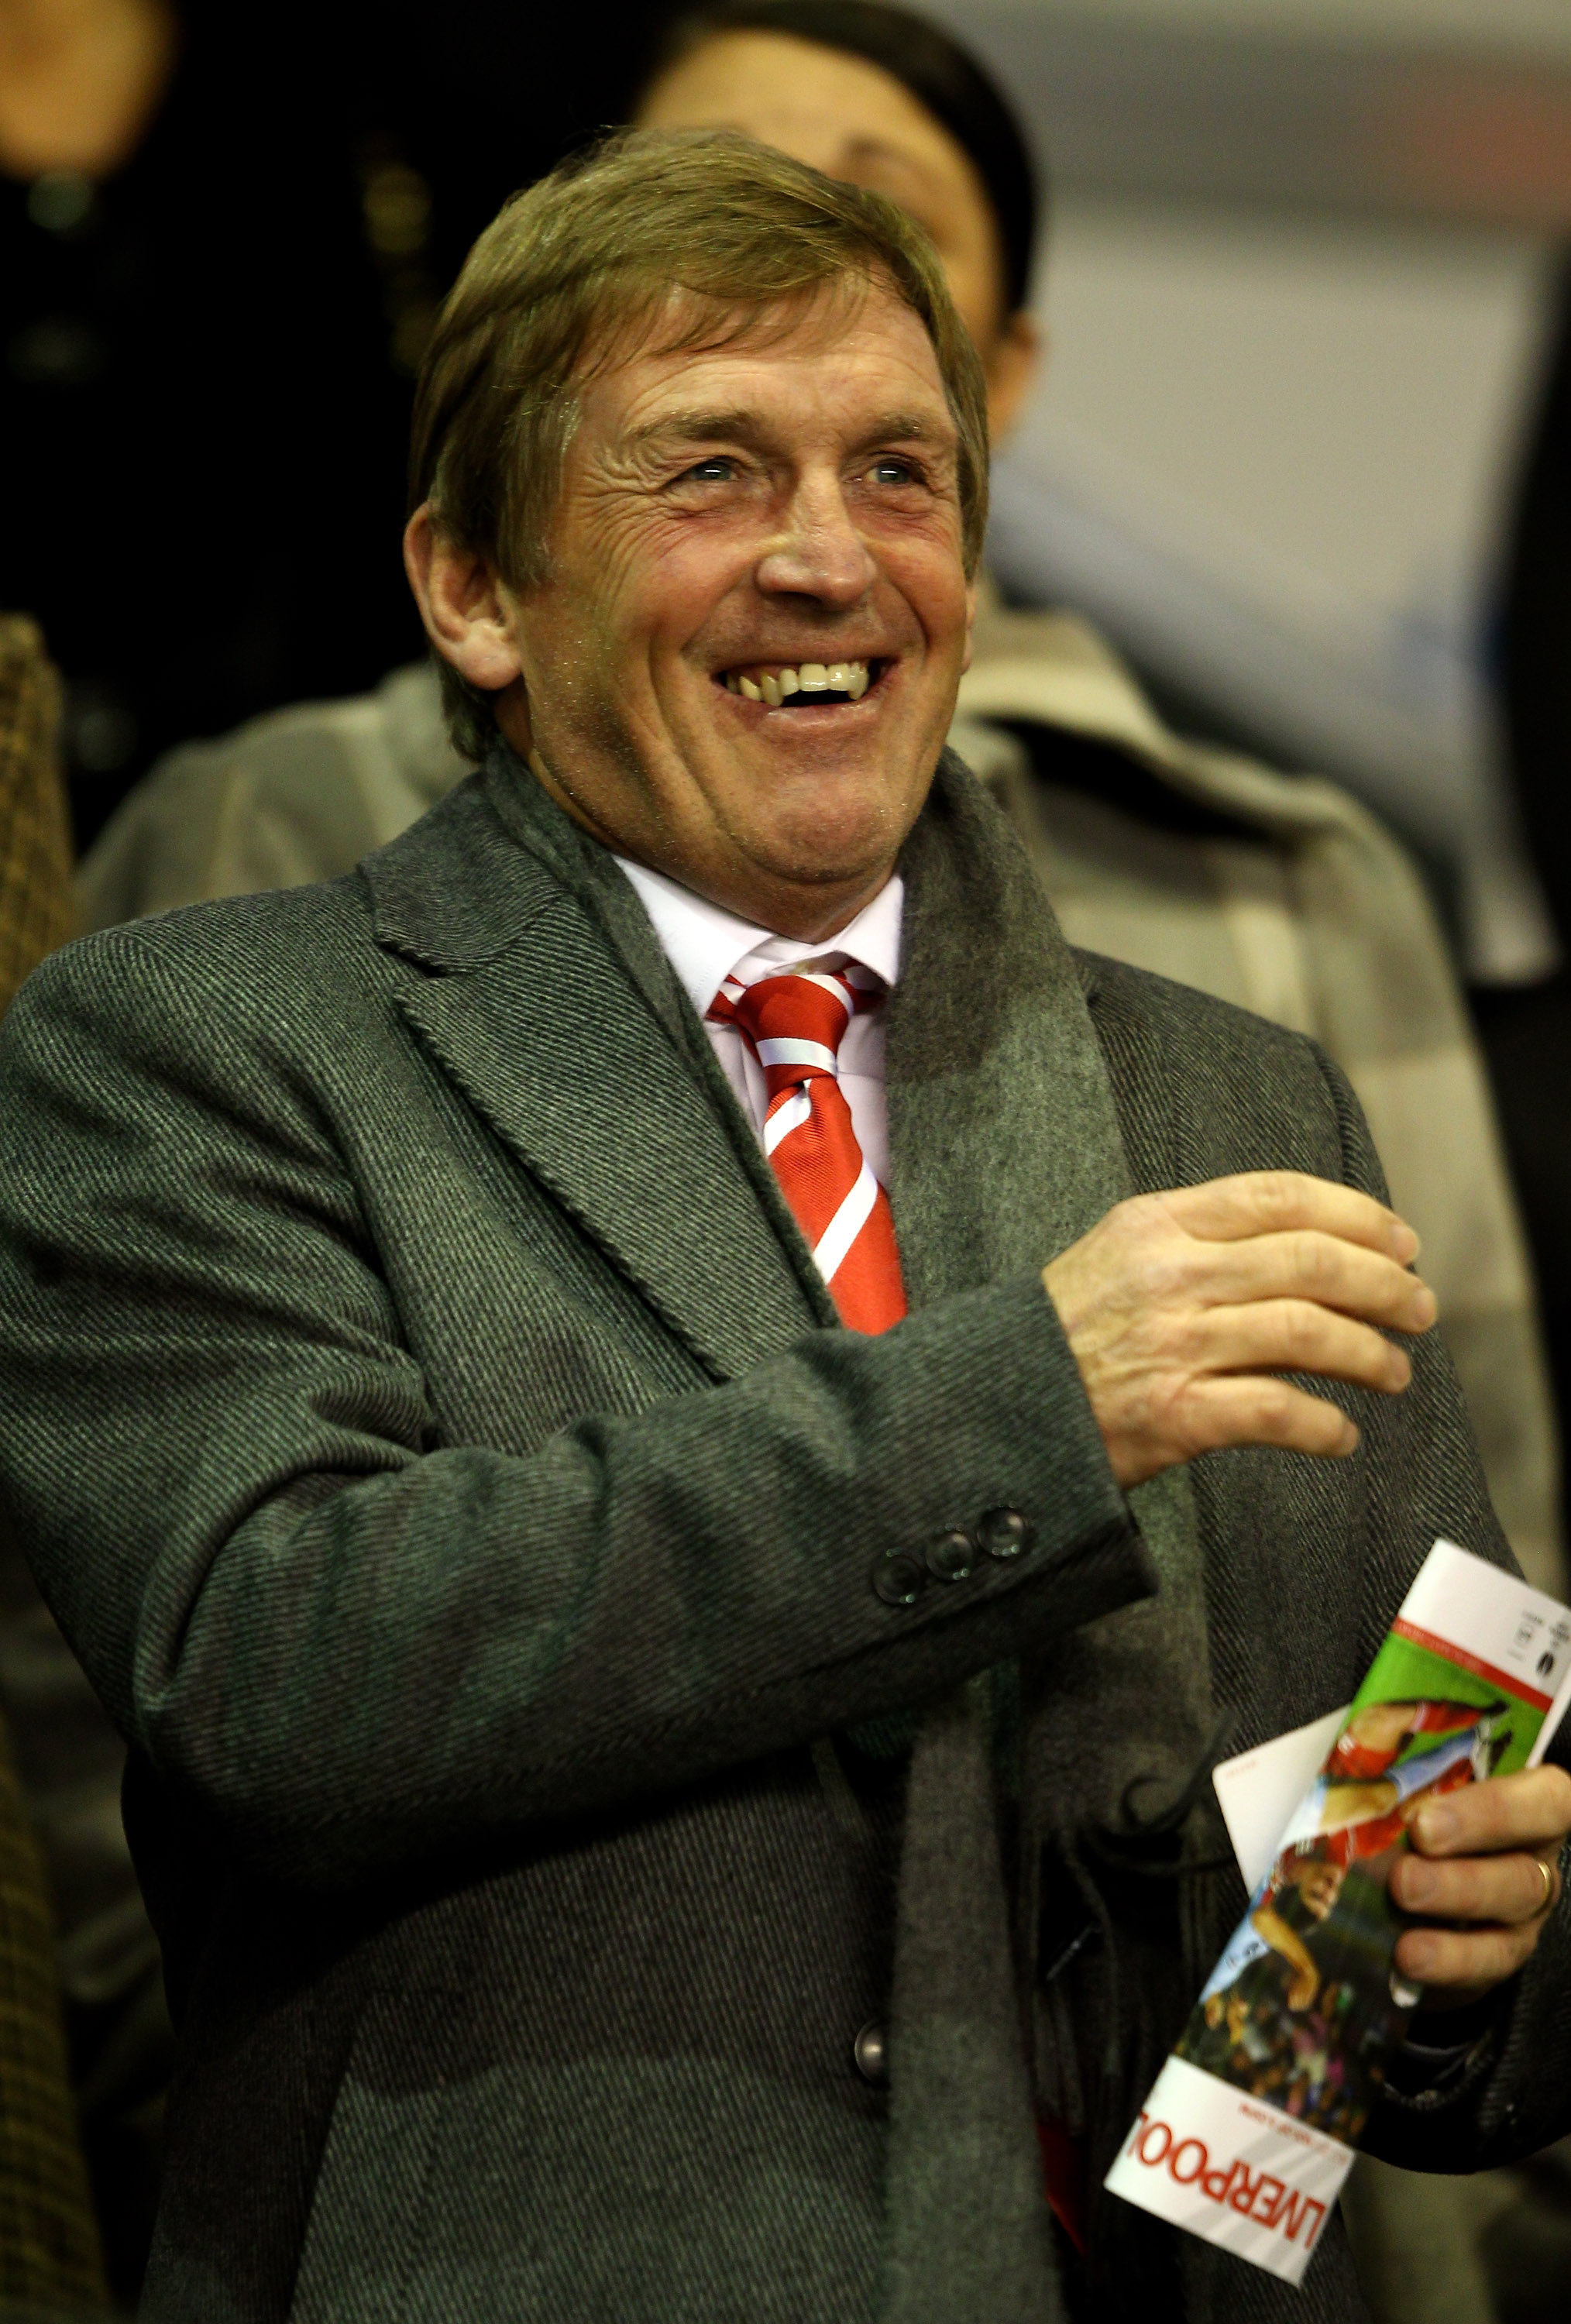 LIVERPOOL, ENGLAND - NOVEMBER 04:  Kenny Dalglish laughs prior to the UEFA Europa League Group K match beteween Liverpool and SSC Napoli at Anfield on November 4, 2010 in Liverpool, England.  (Photo by Clive Brunskill/Getty Images)